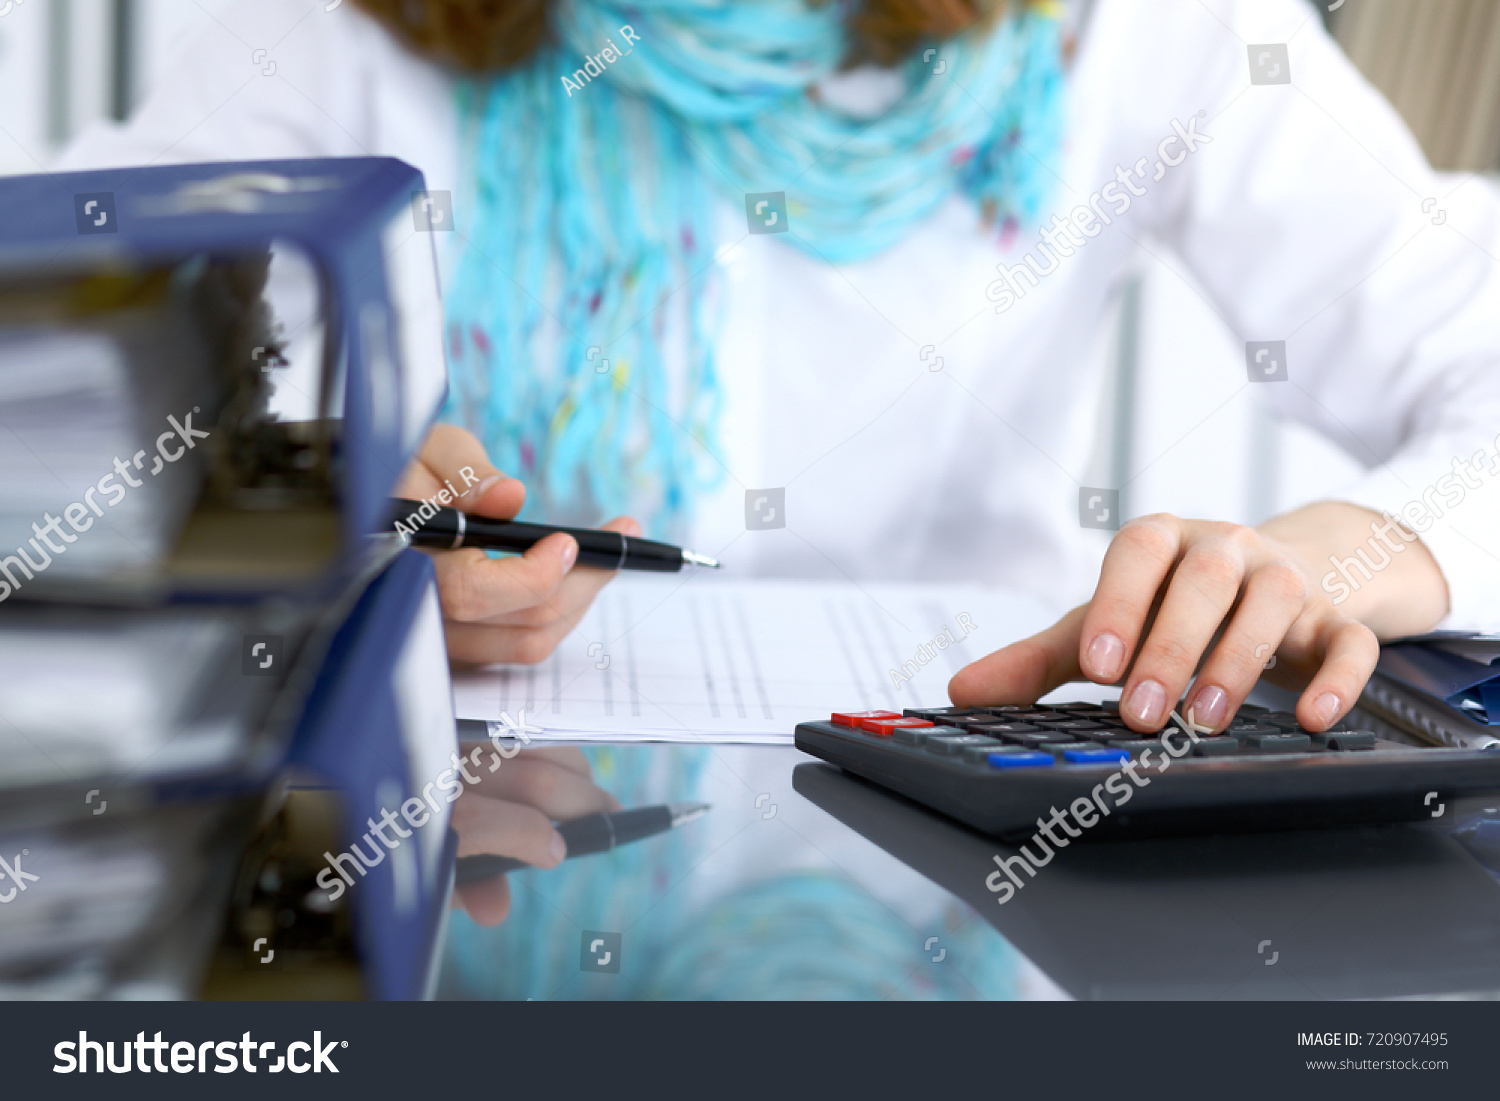 Female bookkeeper or financial inspector  making report, calculating or checking balance. Internal Revenue Service checking financial document. Audit concept #720907495